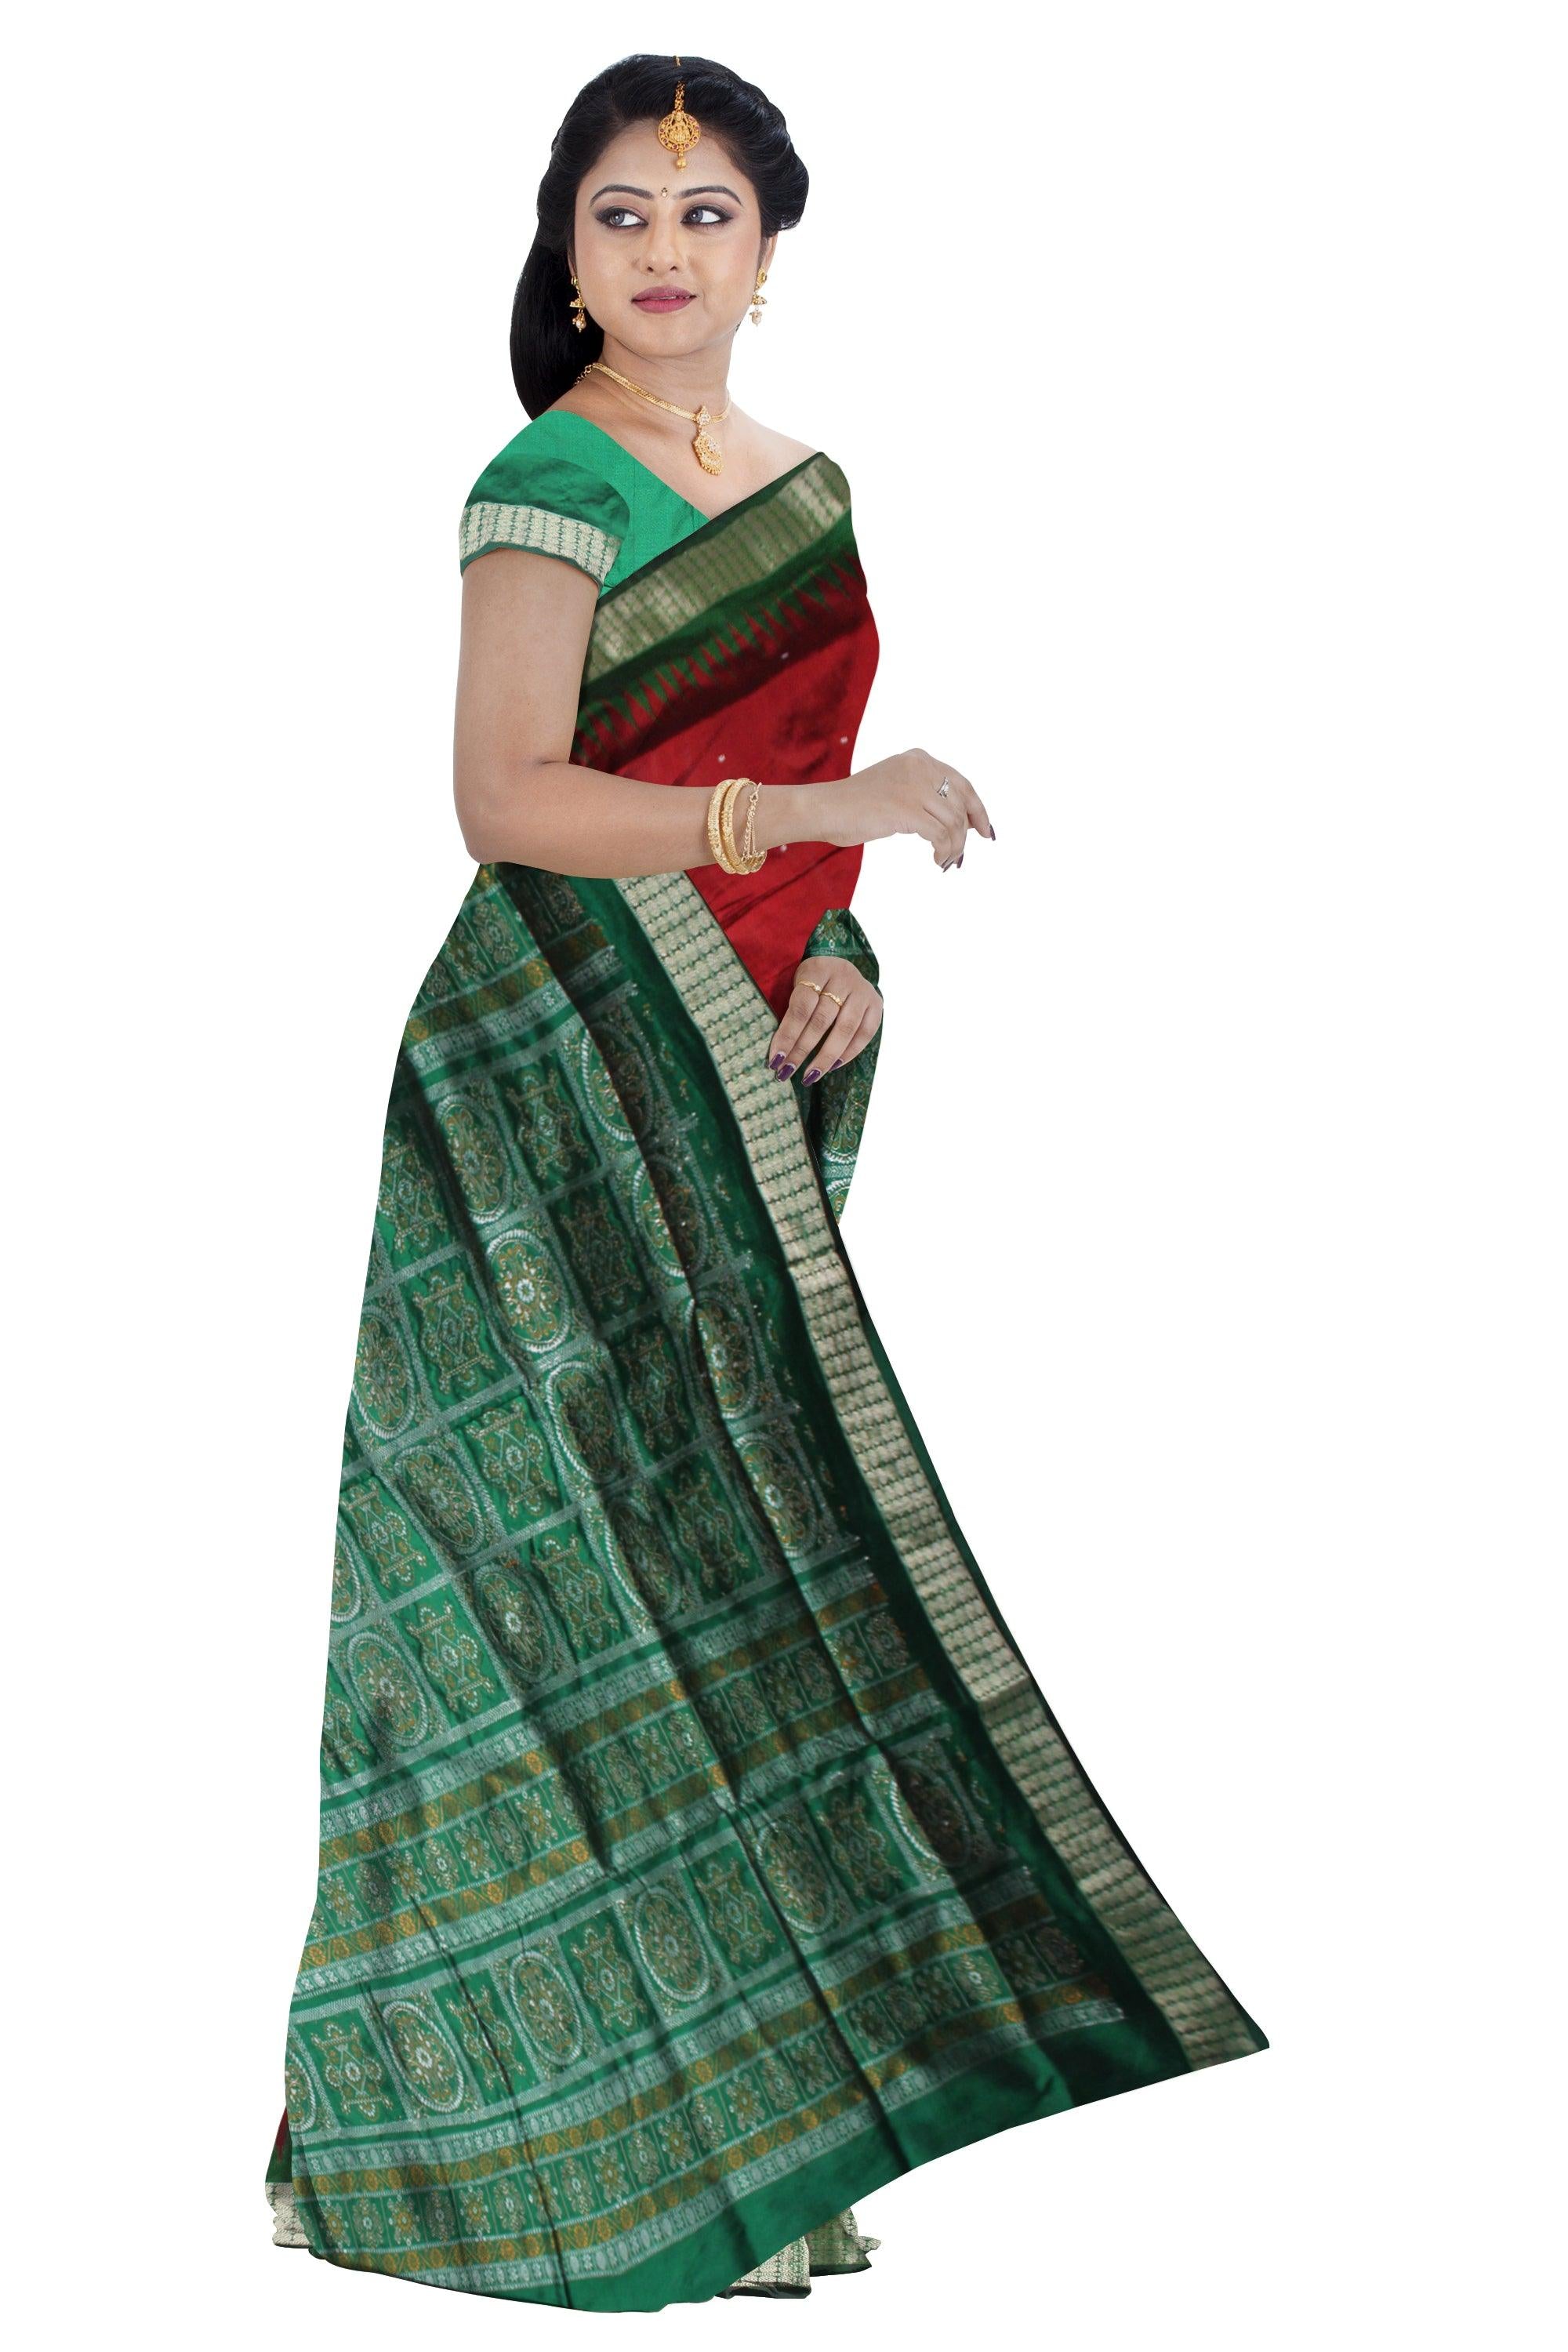 PALLU BOMKEI PATTERN AND BODY BOOTY DESIGN PATA SAREE  IN MAROON AND GREEN COLOR, ATTACHED WITH BLOUSE PIECE. - Koshali Arts & Crafts Enterprise